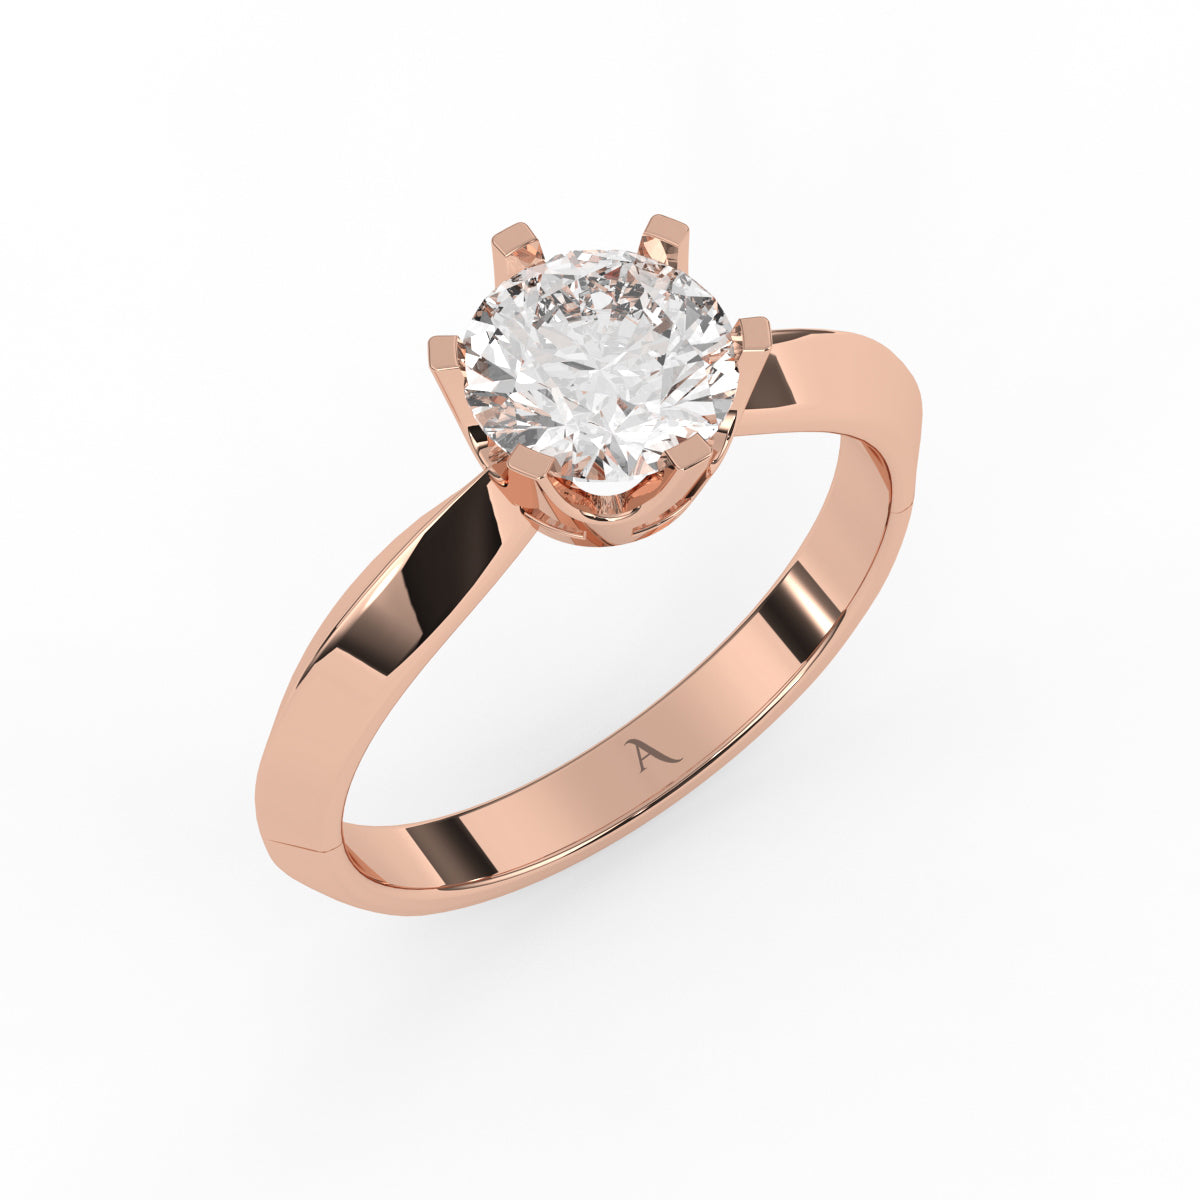 Solitaire knight edge ring